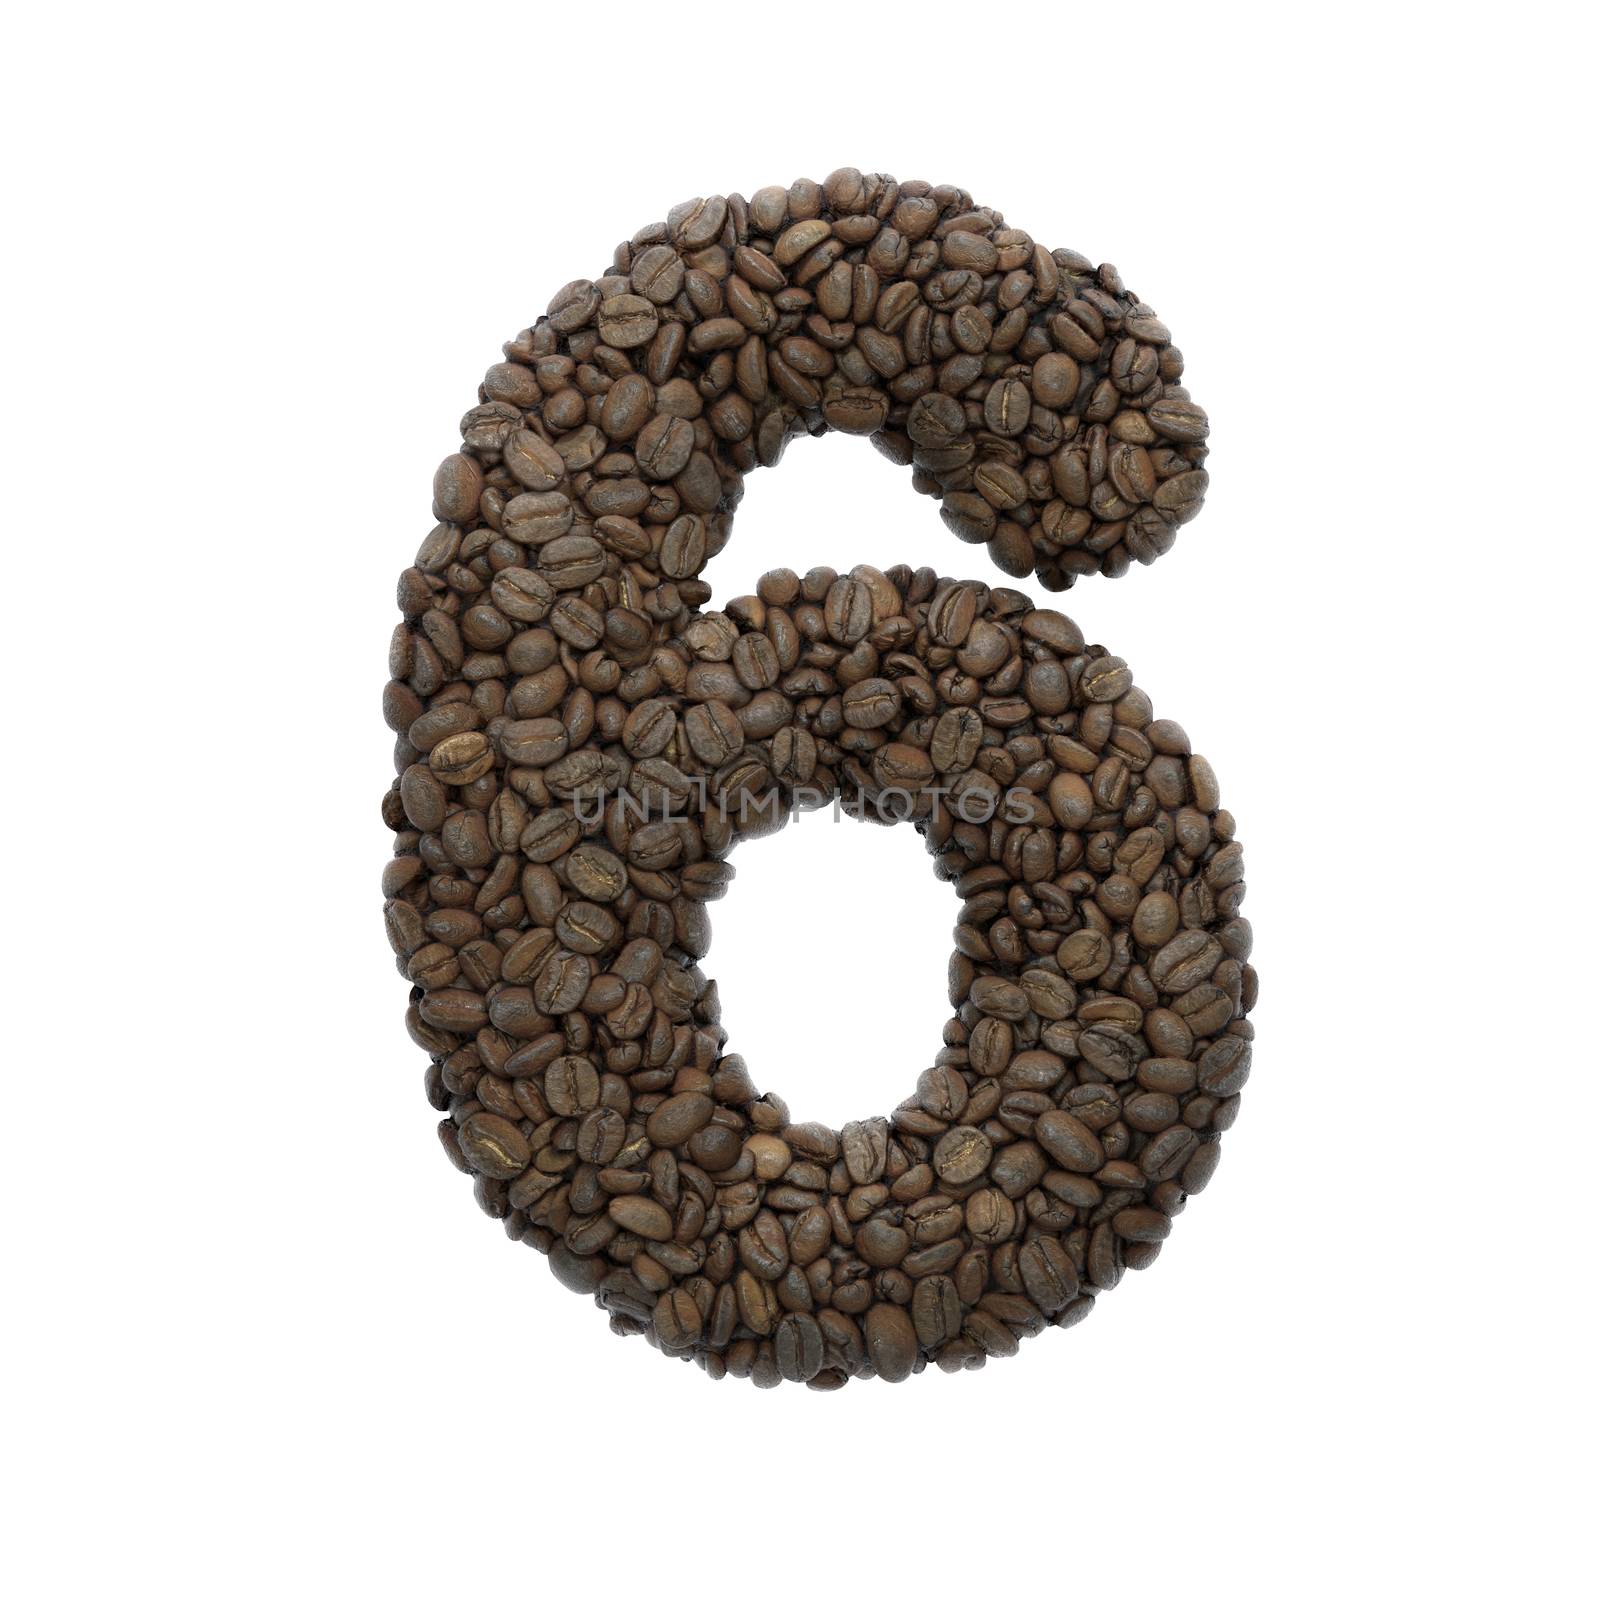 Coffee number 6 -  3d roasted beans digit - Suitable for Coffee, energy or insomnia related subjects by chrisroll